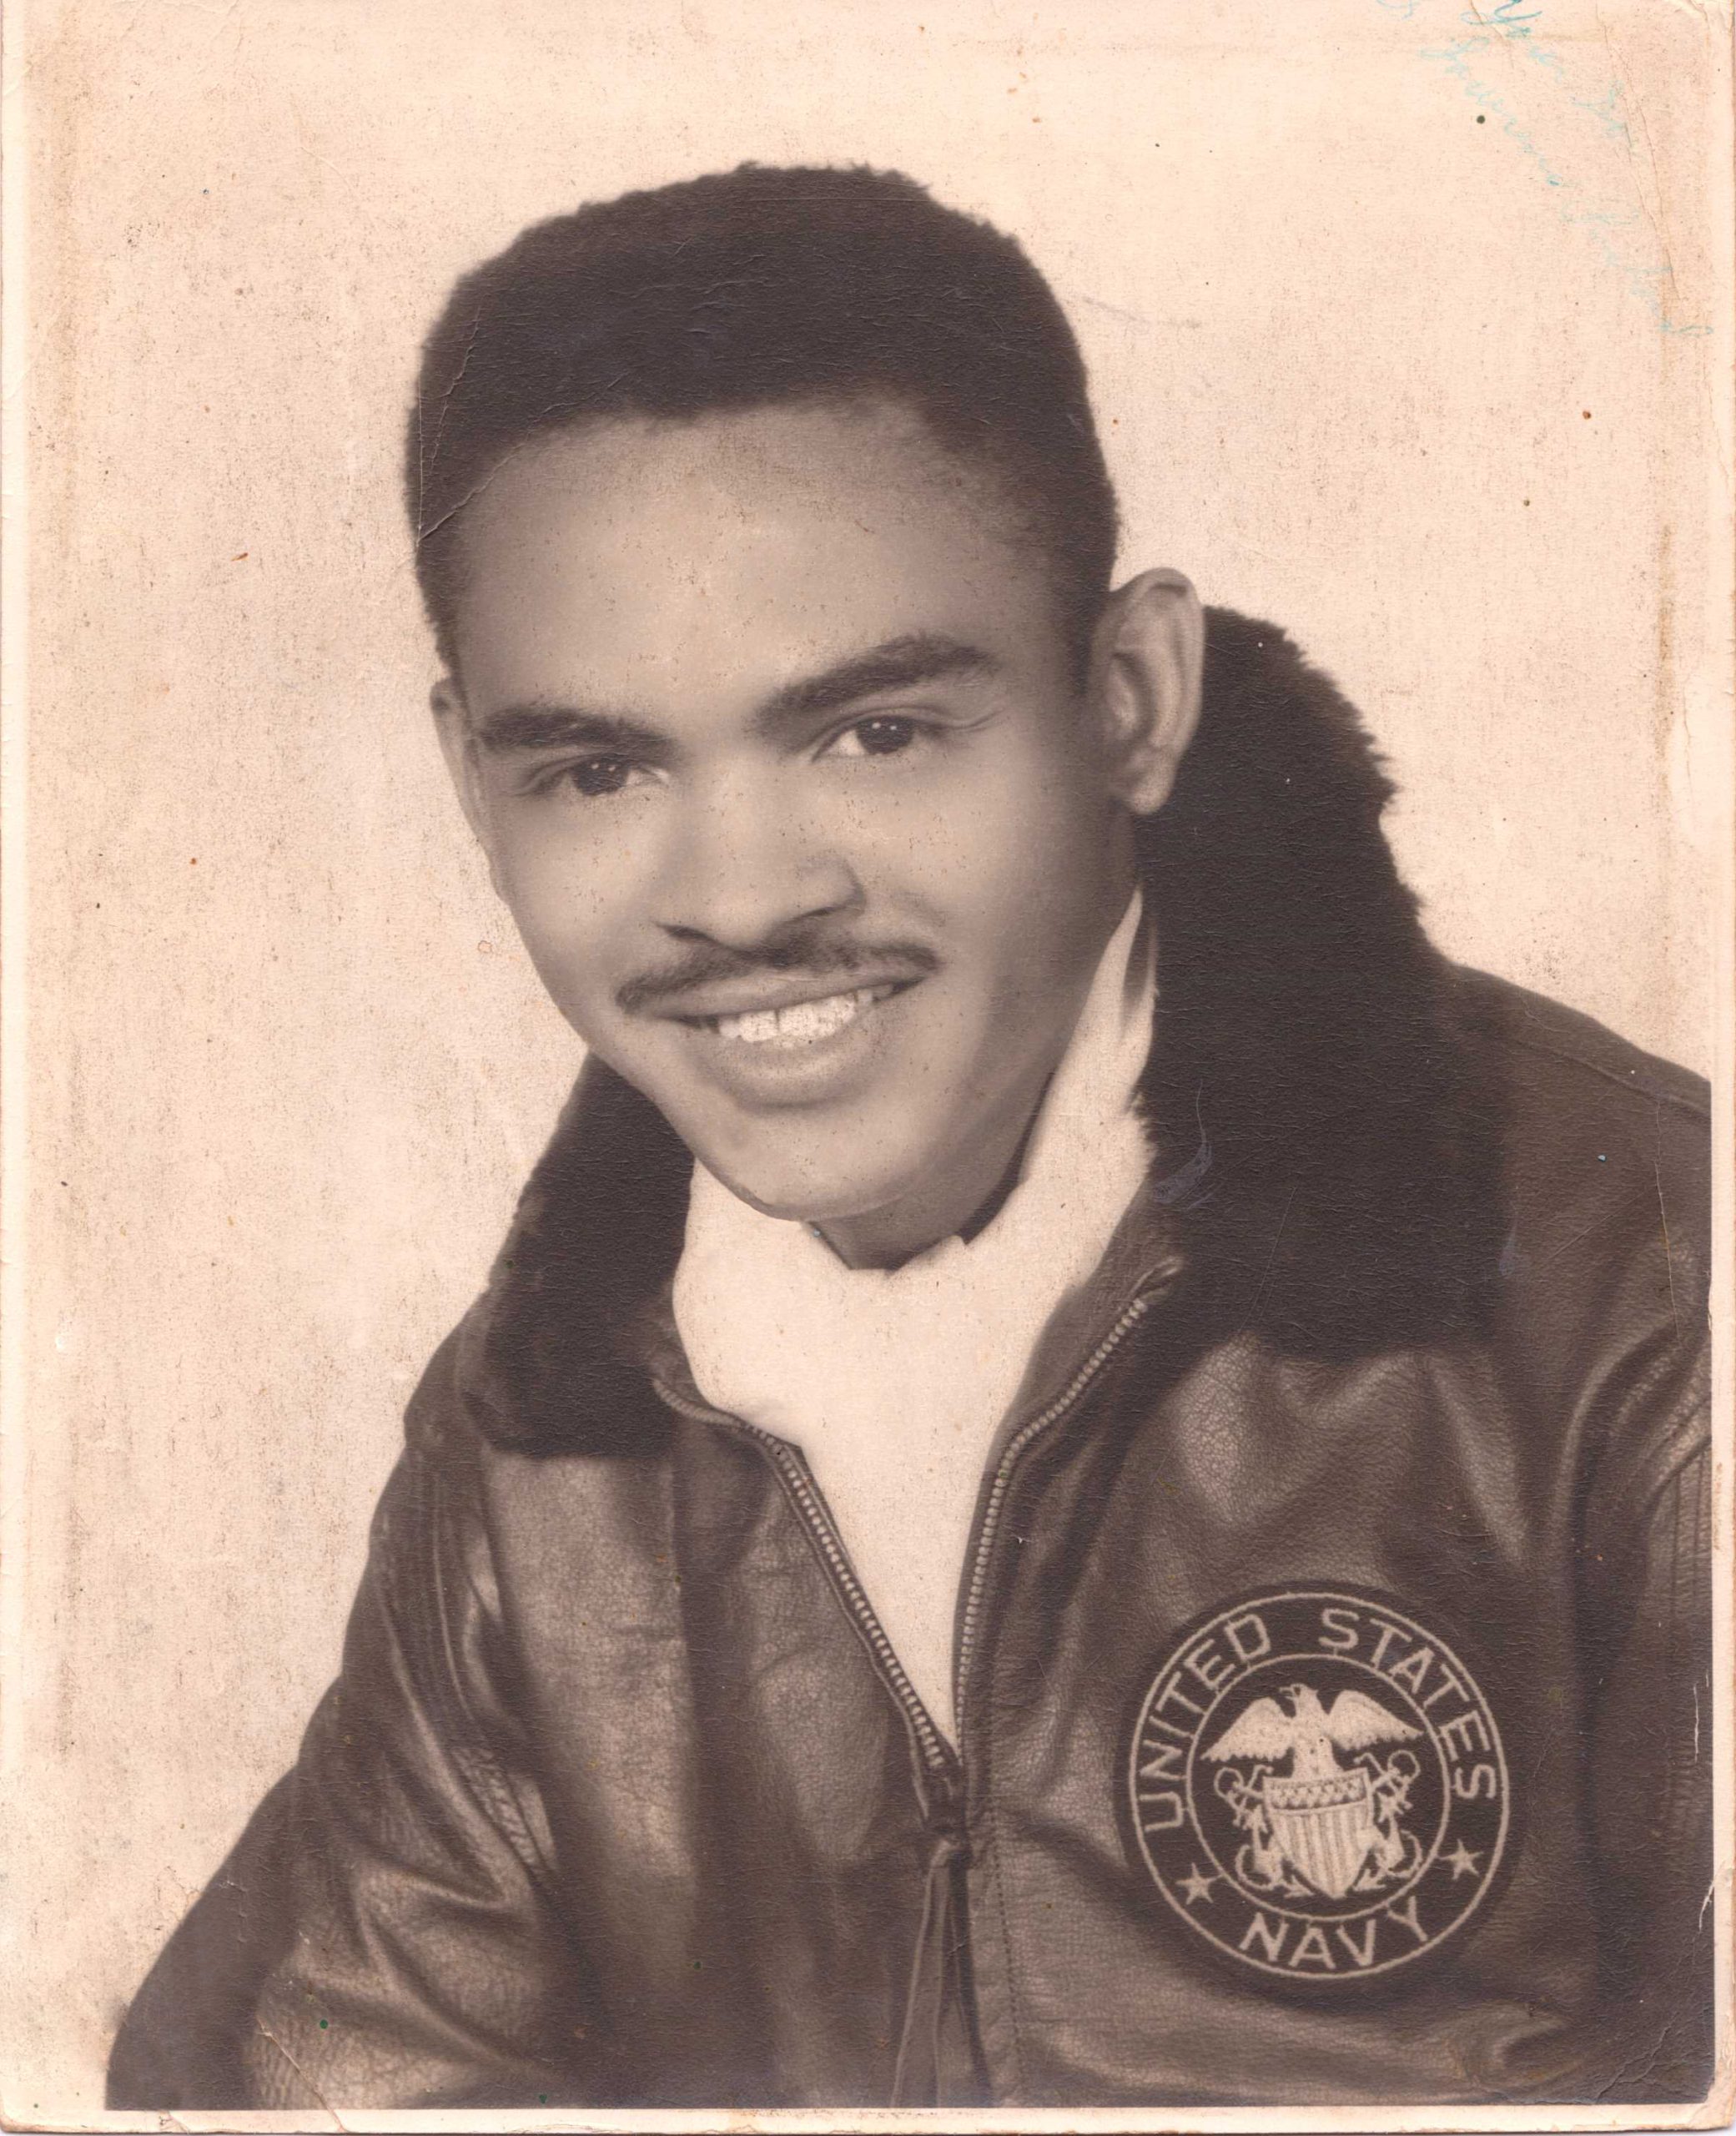 Black Navy veteran wearing a jacket and a scarf